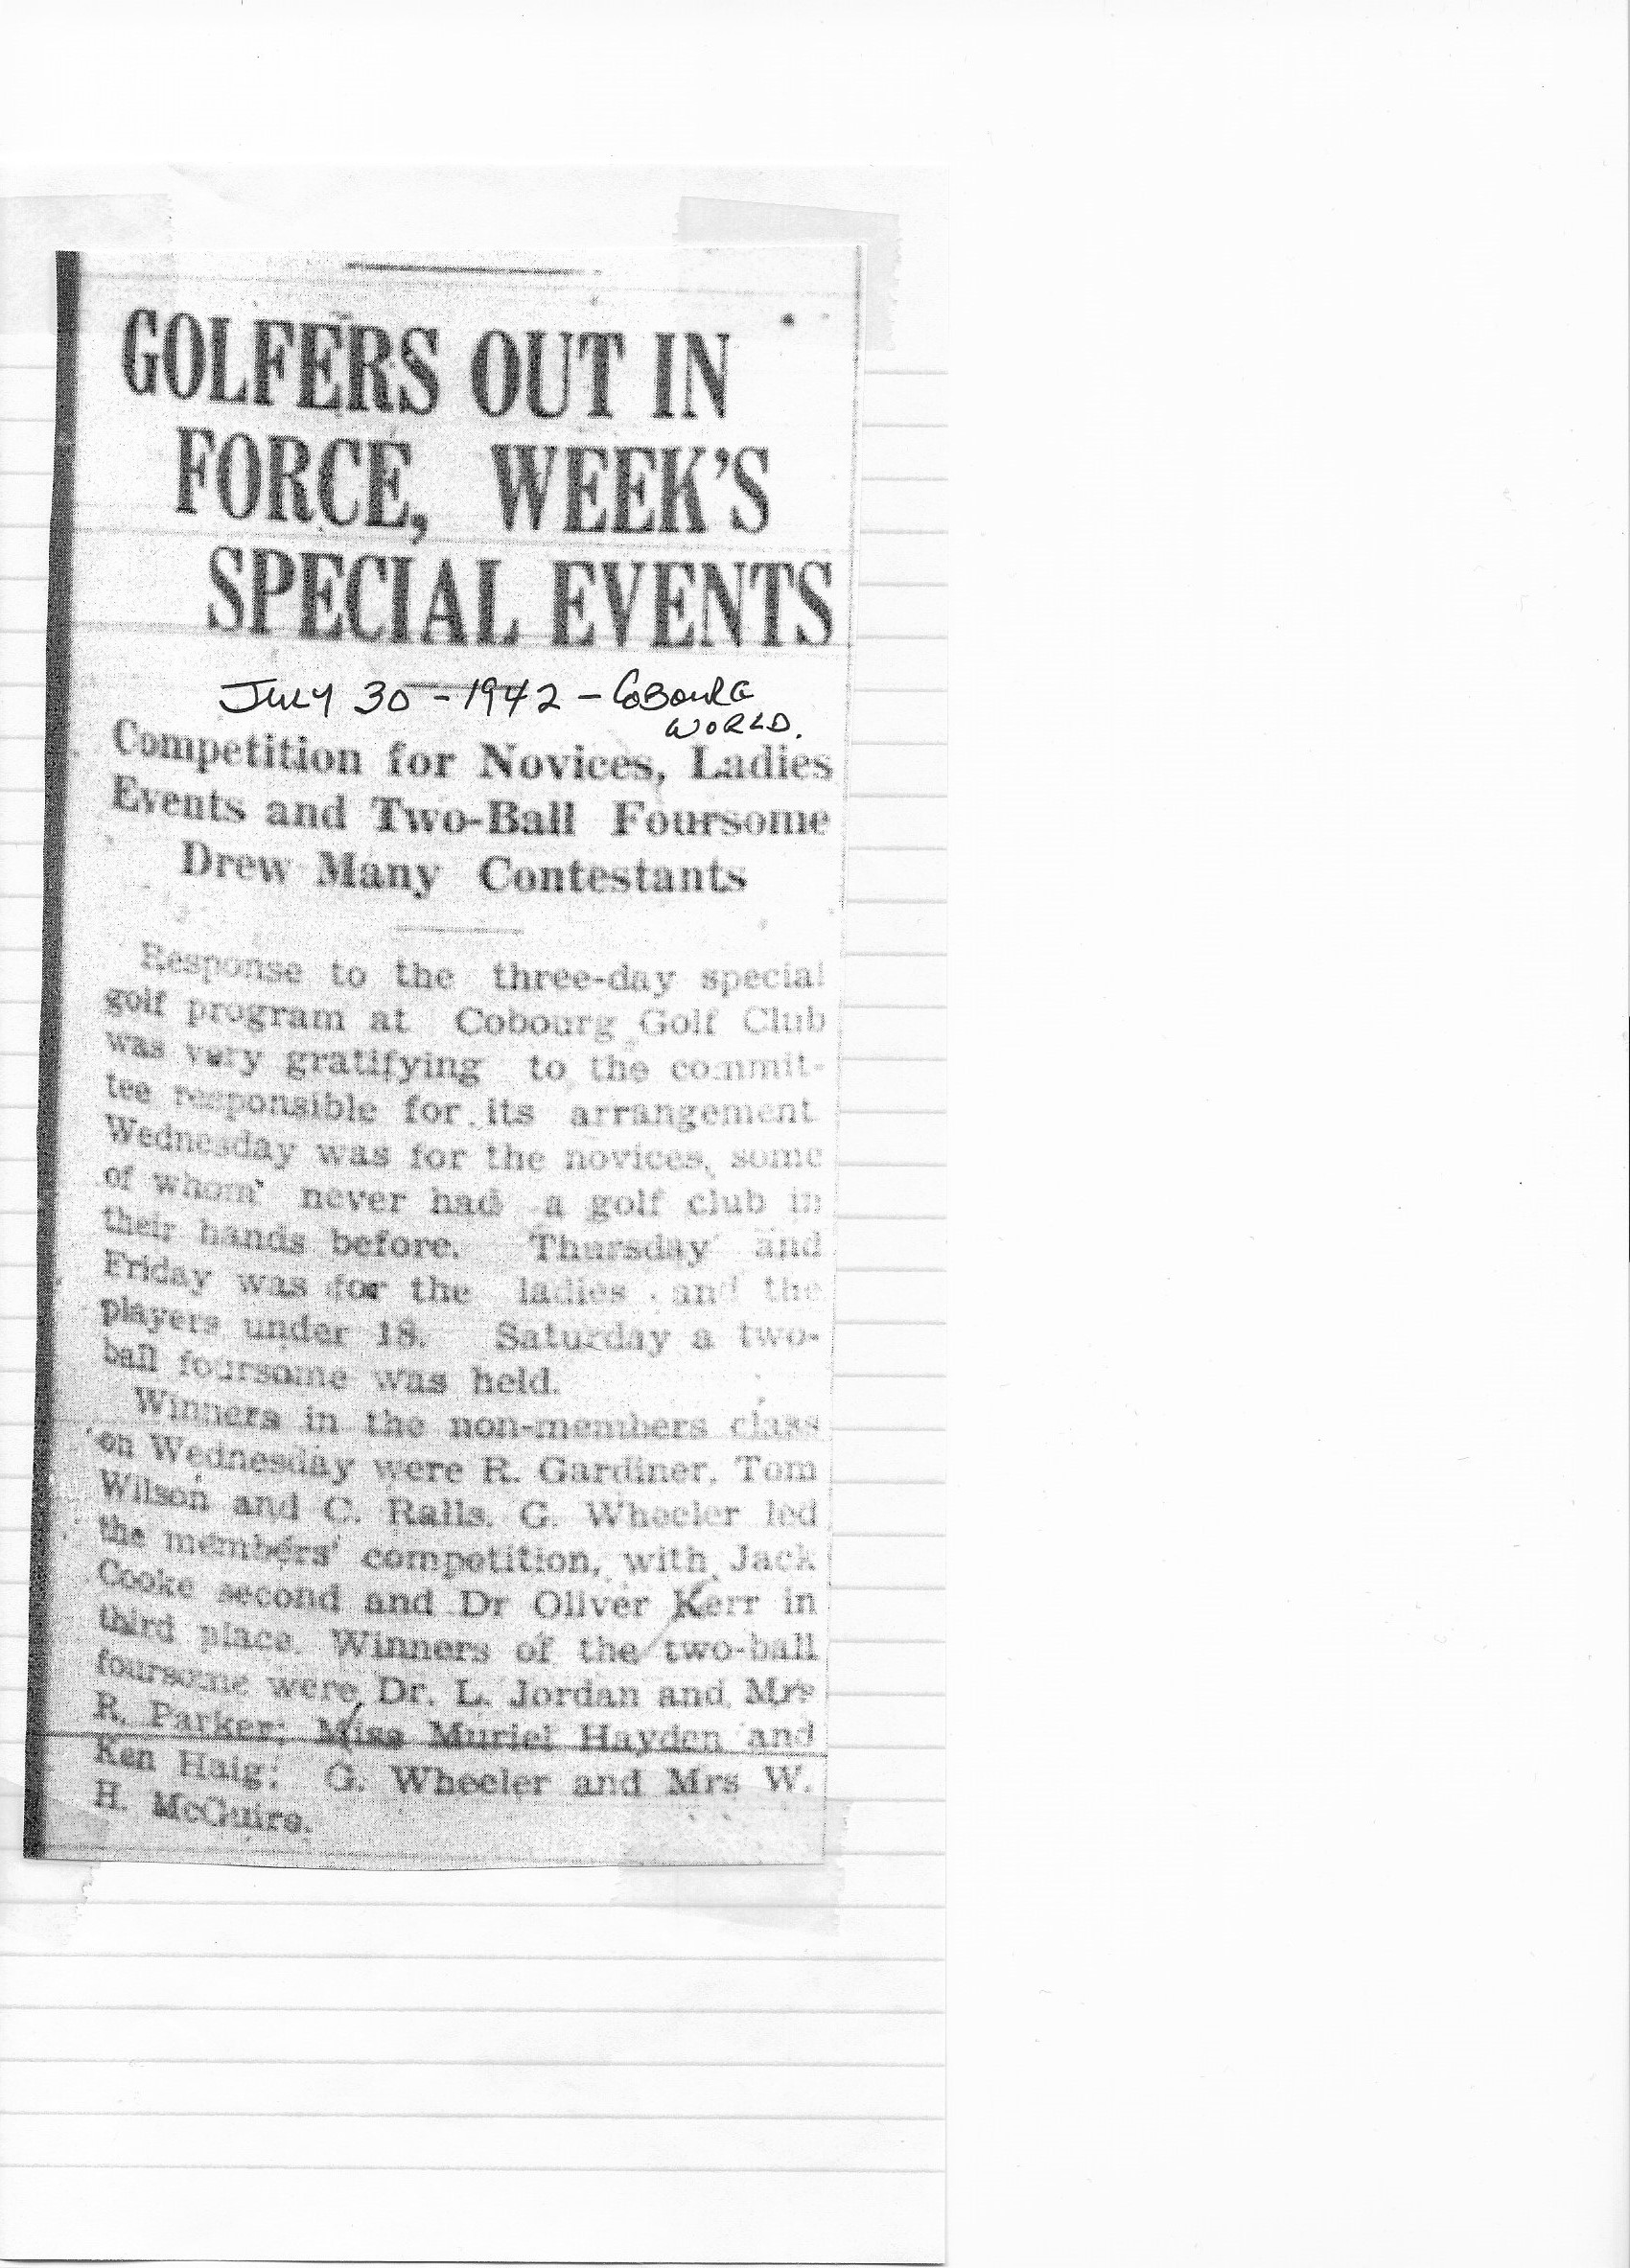 1942-07-30 Golf -Special Events